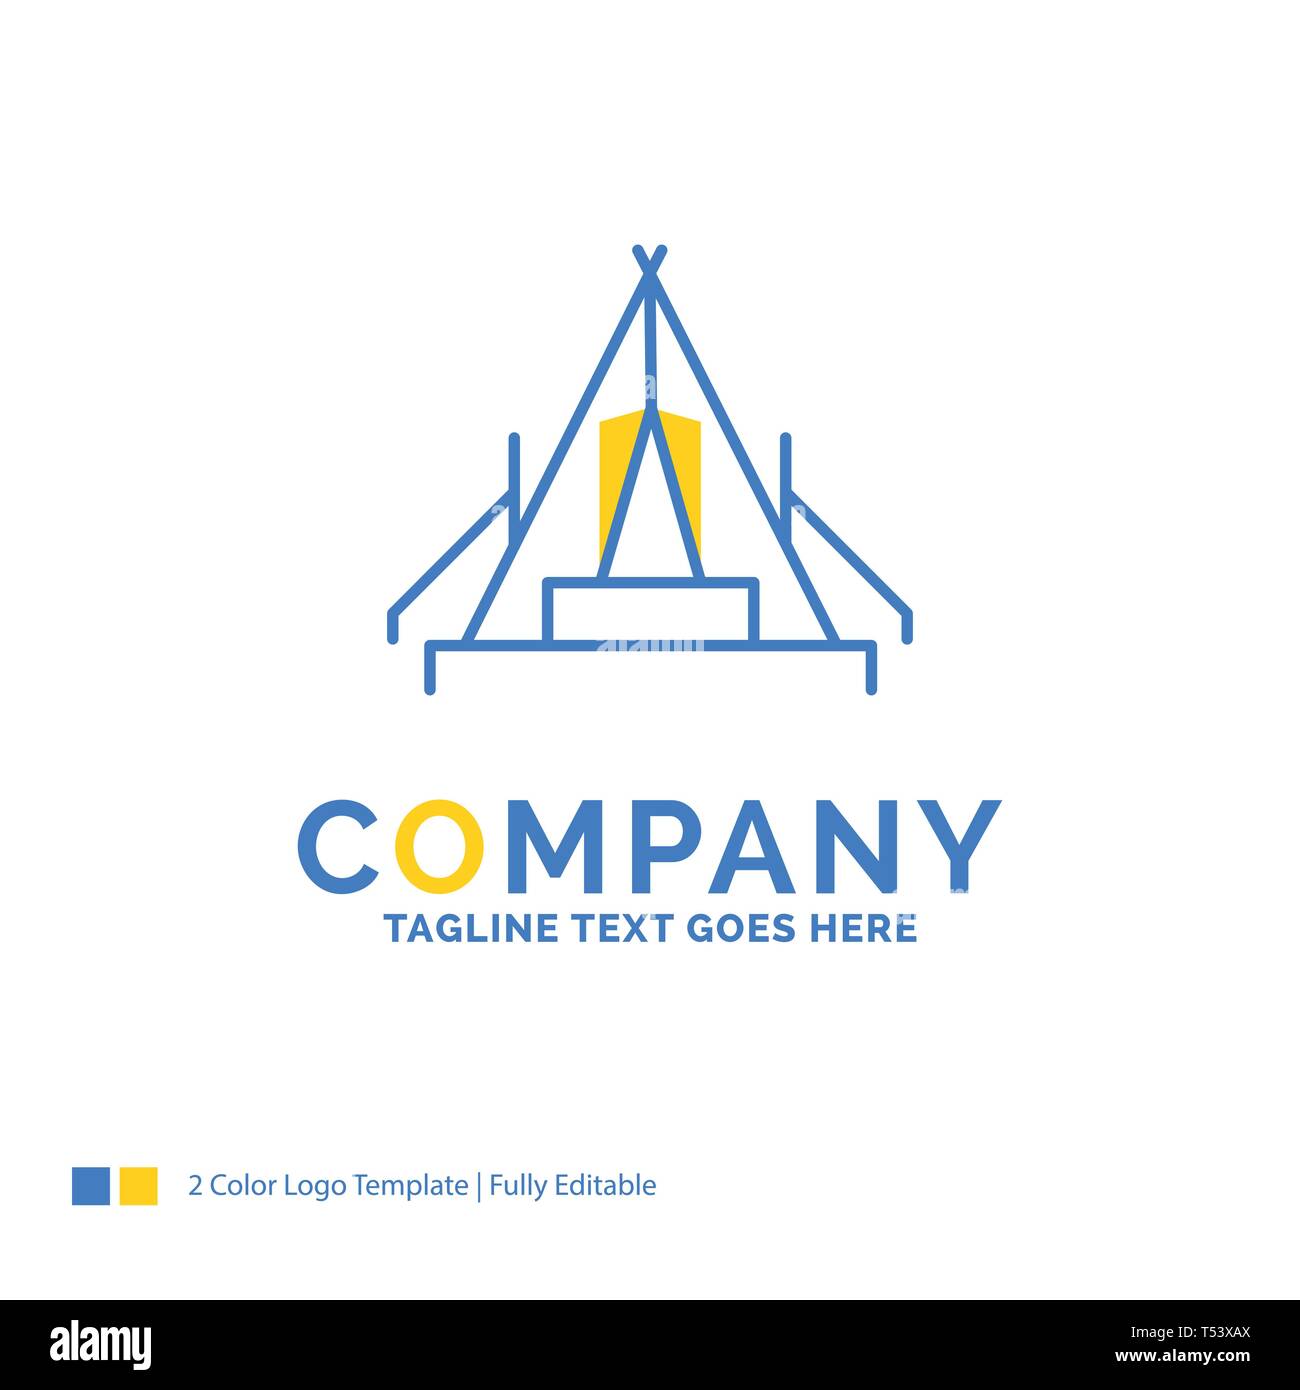 tent, camping, camp, campsite, outdoor Blue Yellow Business Logo template. Creative Design Template Place for Tagline. Stock Vector